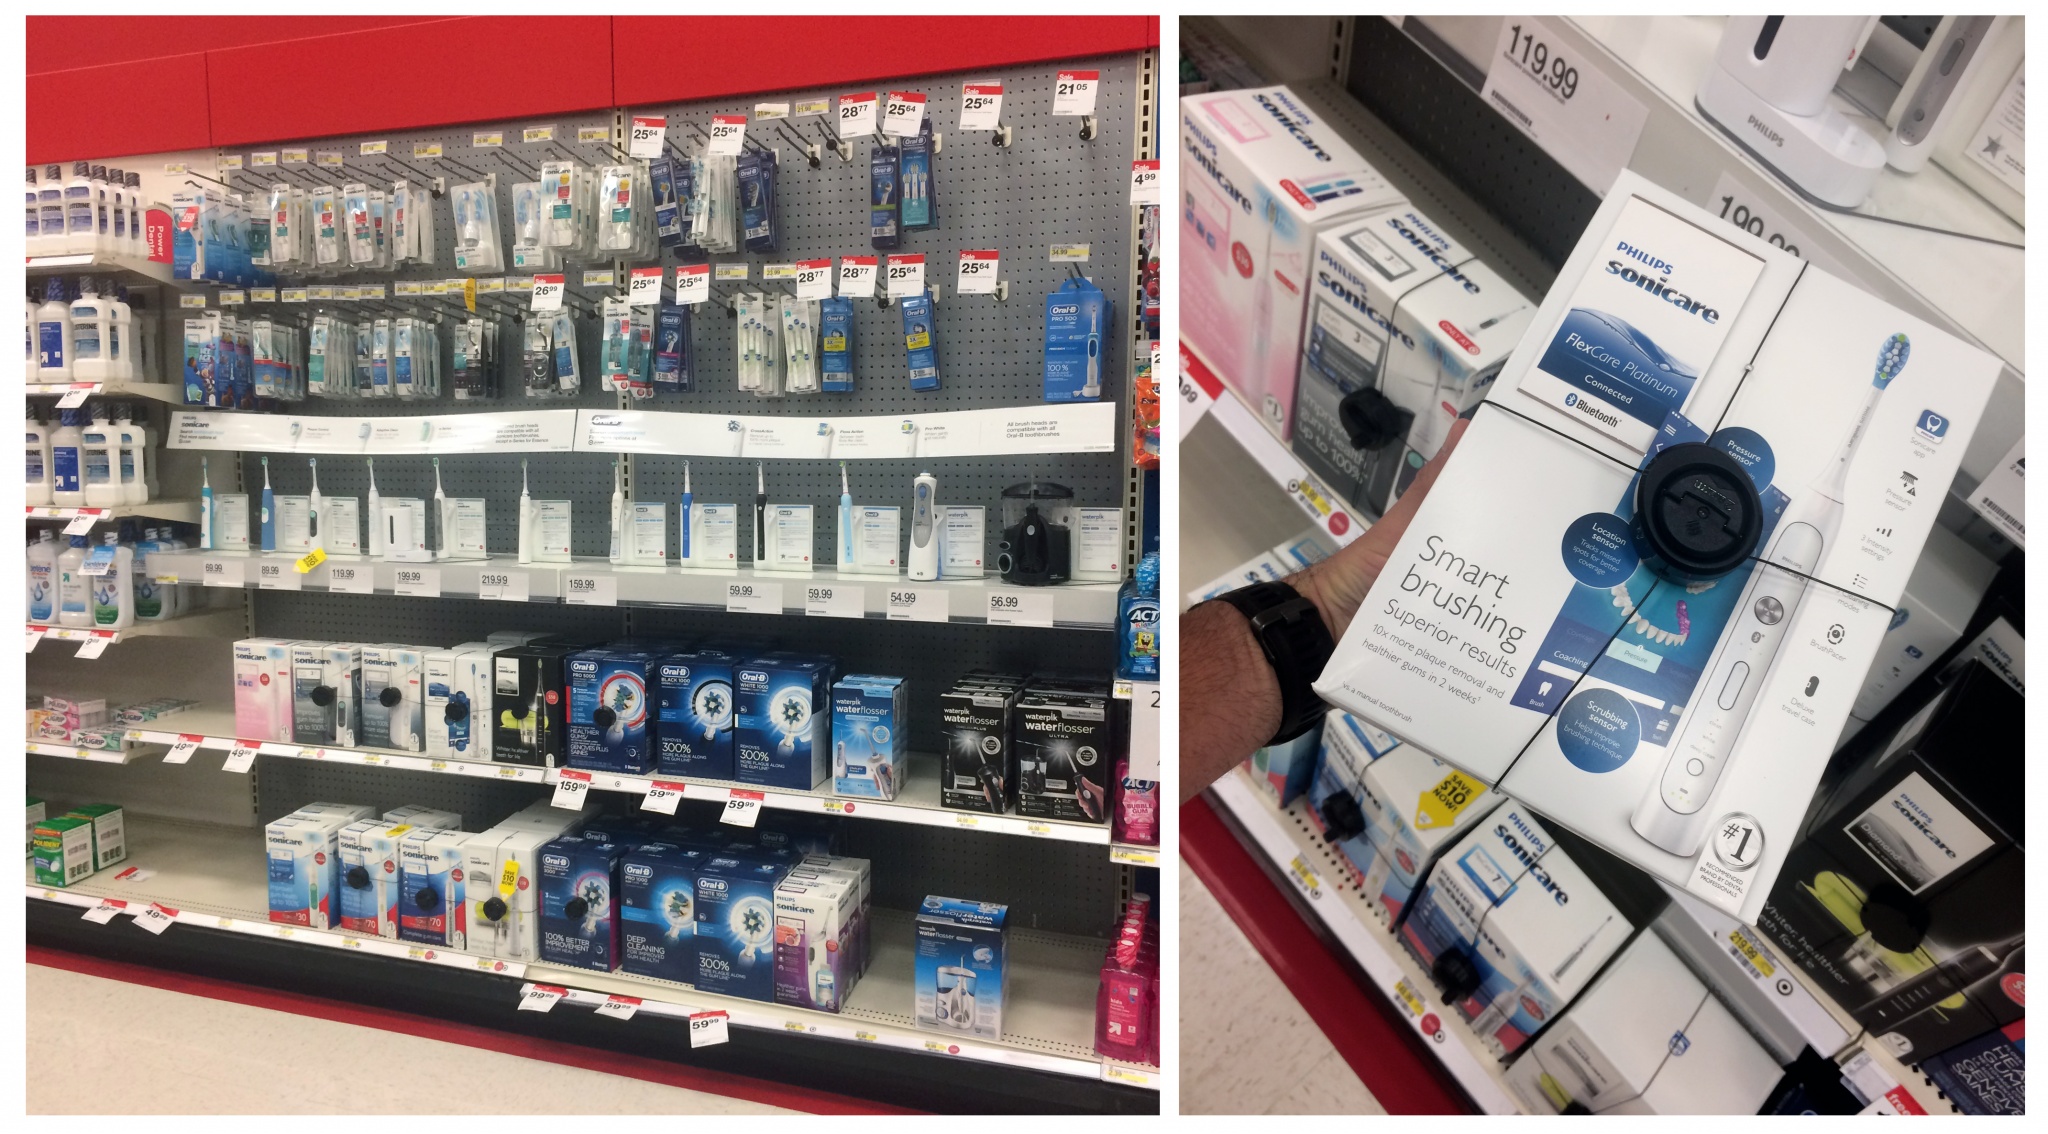 Philips at Target